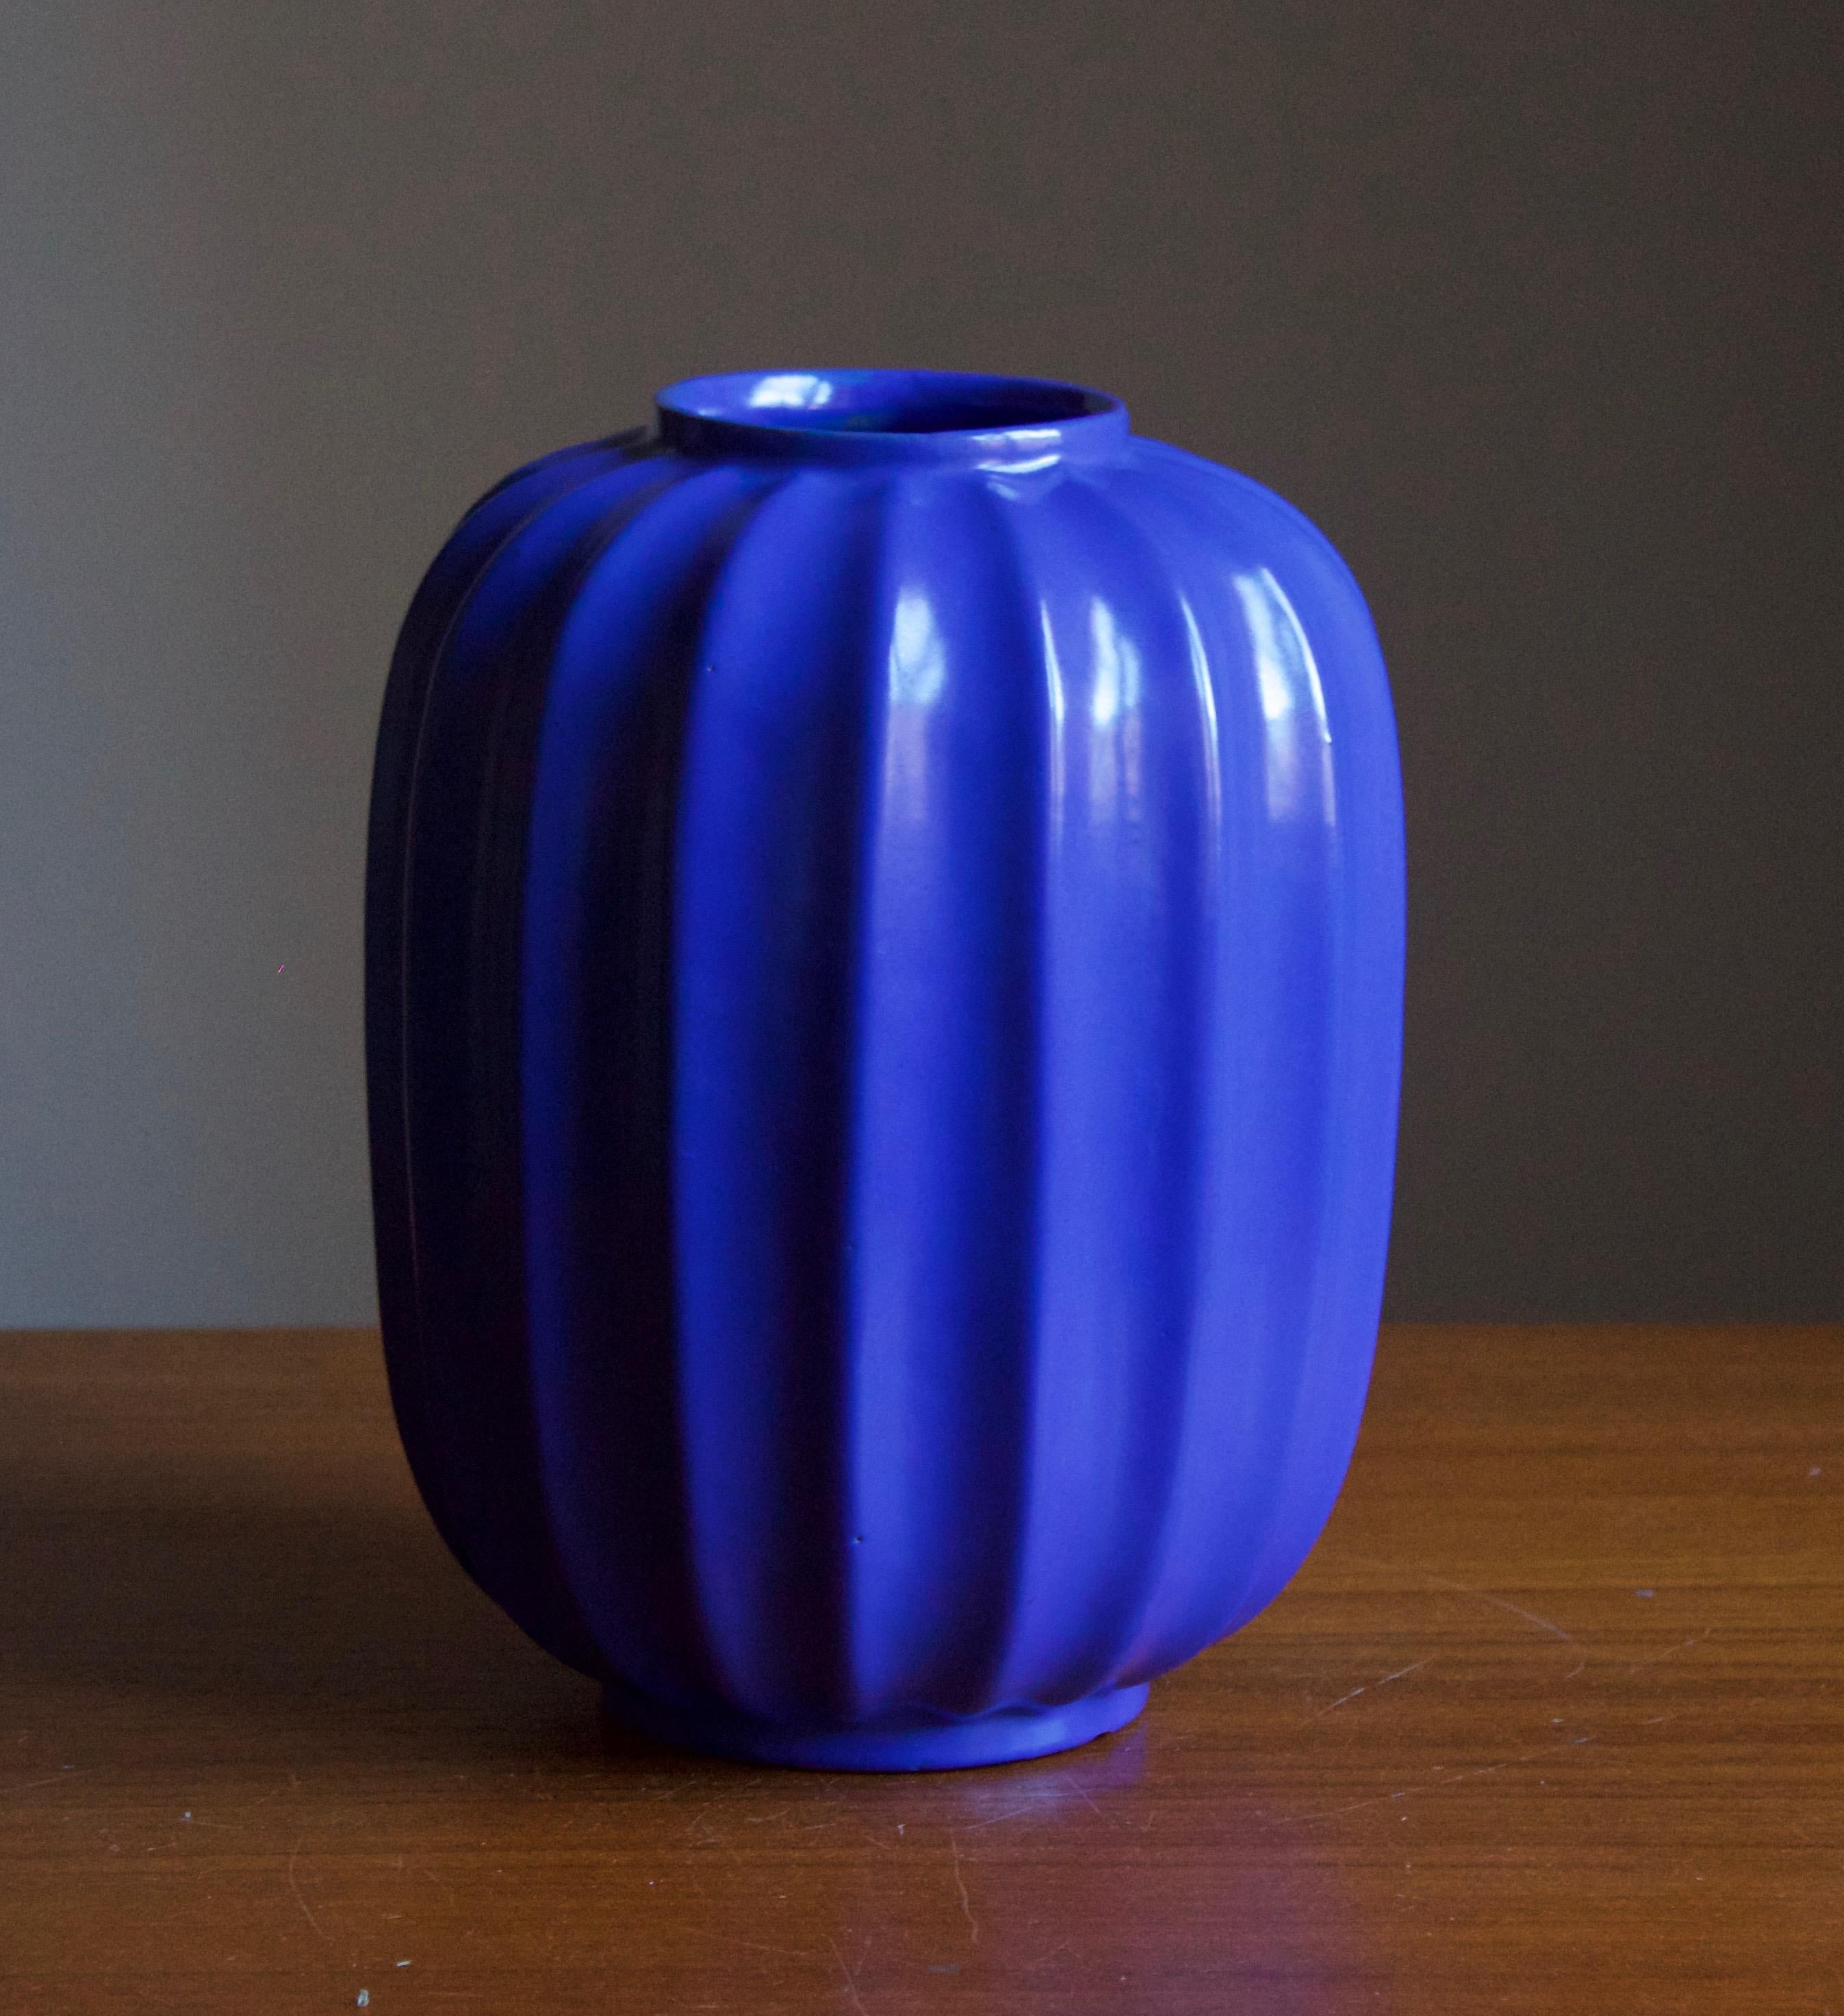 An early modernist vase. Production attributed to Upsala-Ekeby, Sweden, c. 1940s. Blue Glazed earthenware. Design attributred to Harald Östergren (1888-1974). Unmarked.

Other designers of the period include Ettore Sottsass, Carl Harry Stålhane,